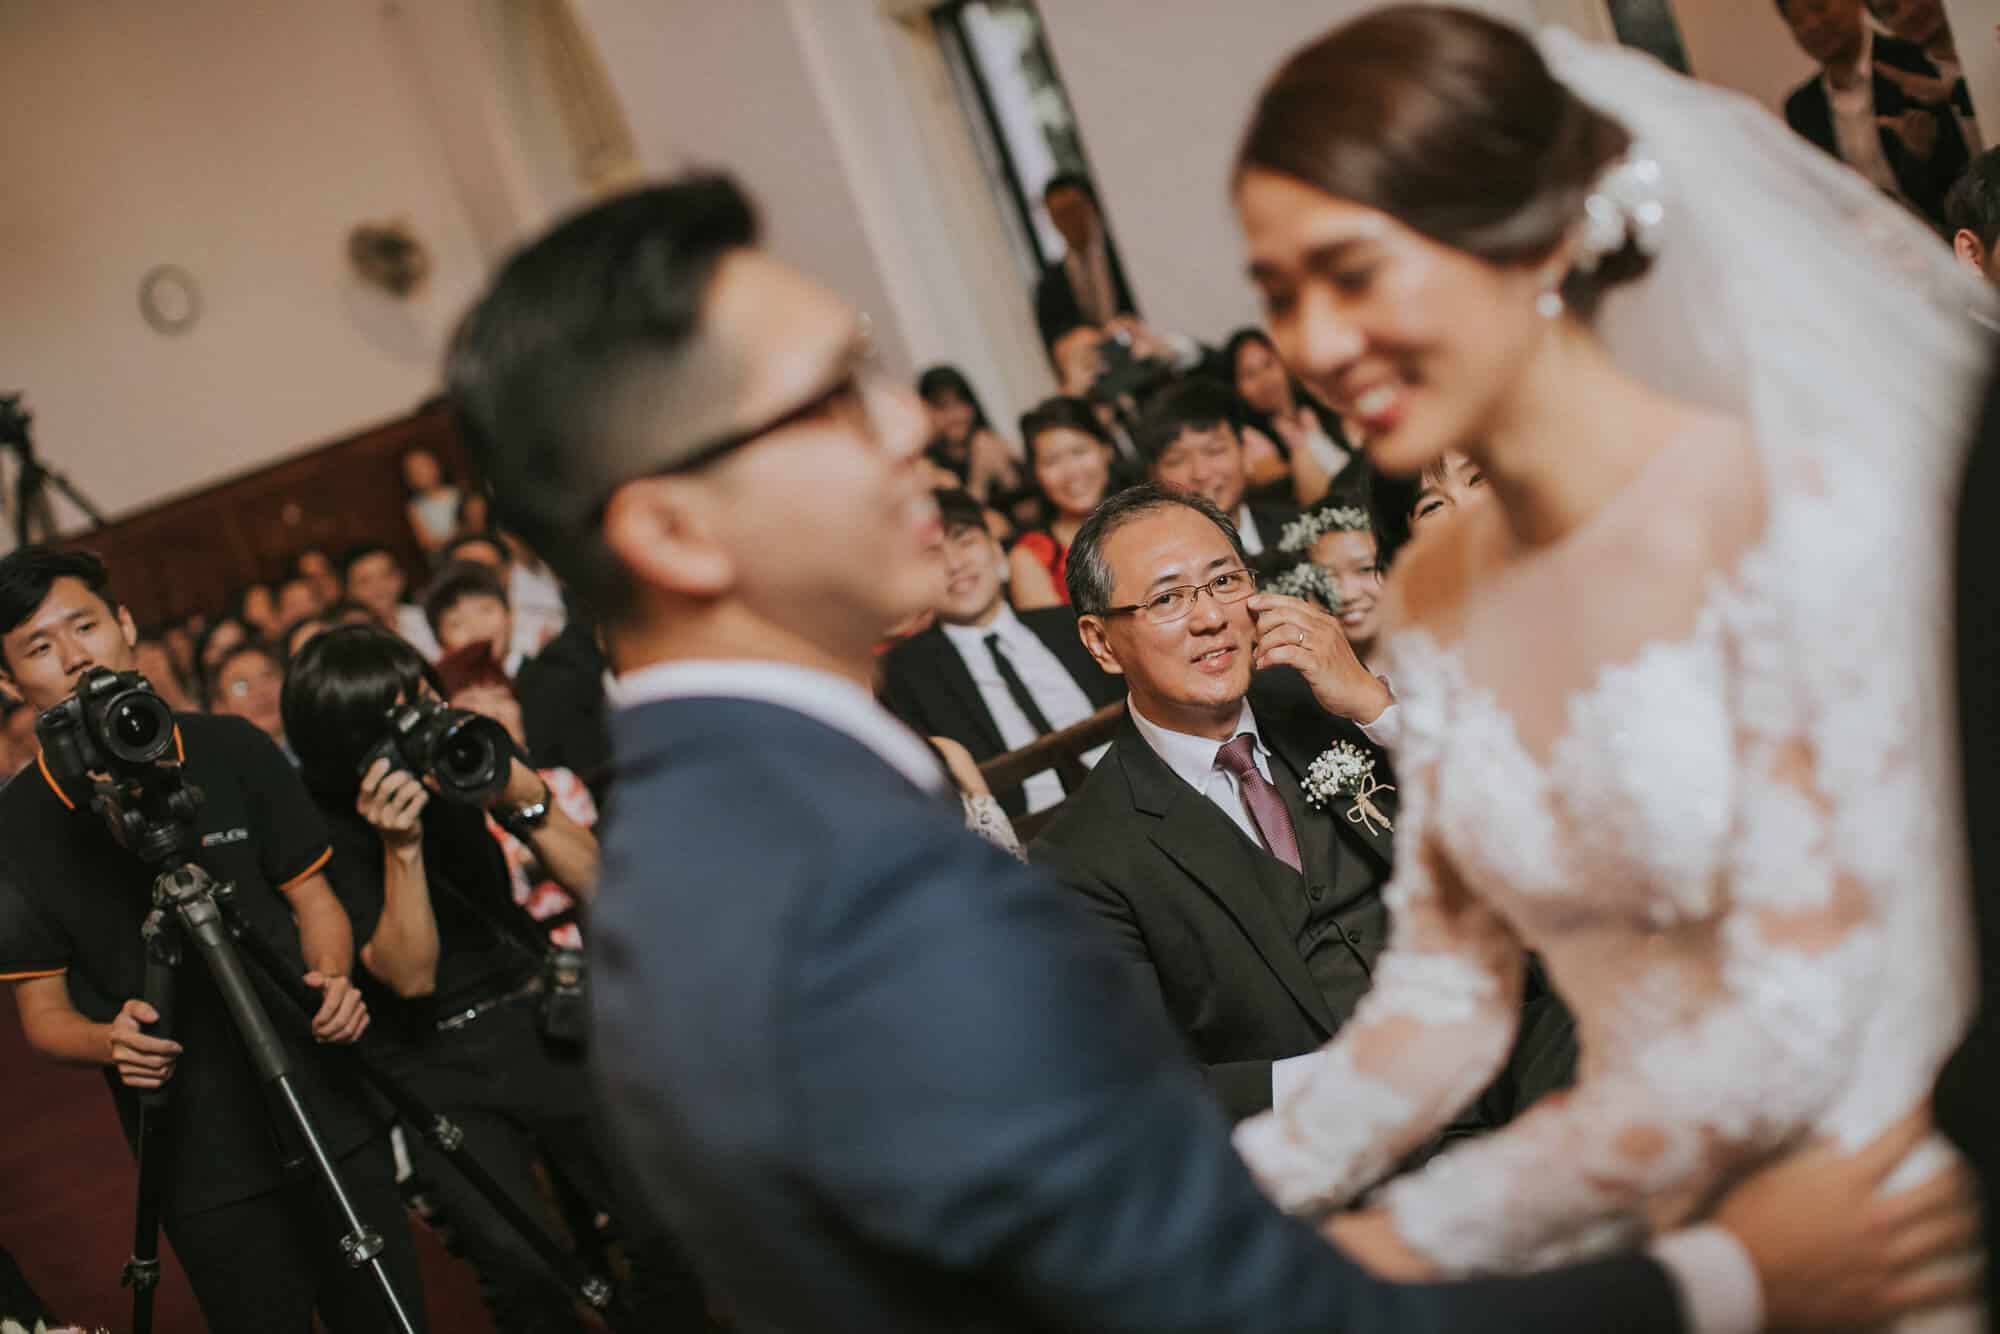 Bride's father emotional moment at the Wedding St. Andrew Church Kuala Lumpur Malaysia Destination Cliff Choong Photography